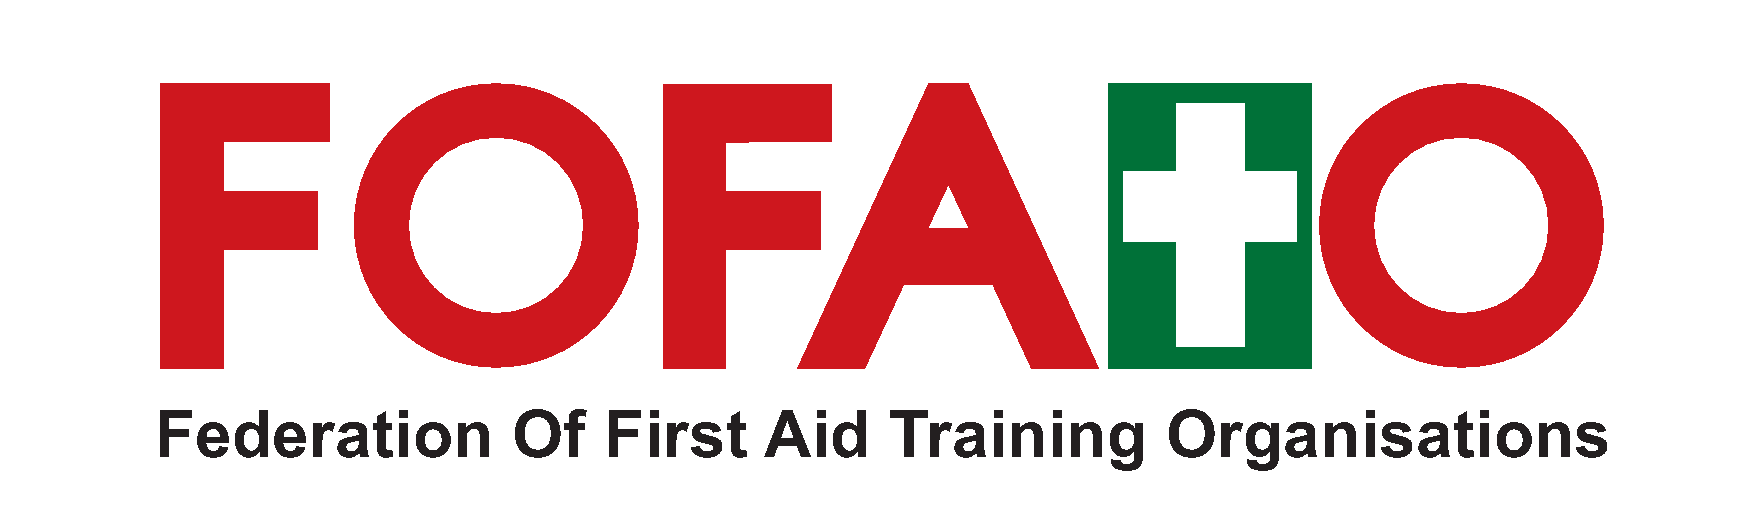 Federation of First Aid Training Organisations